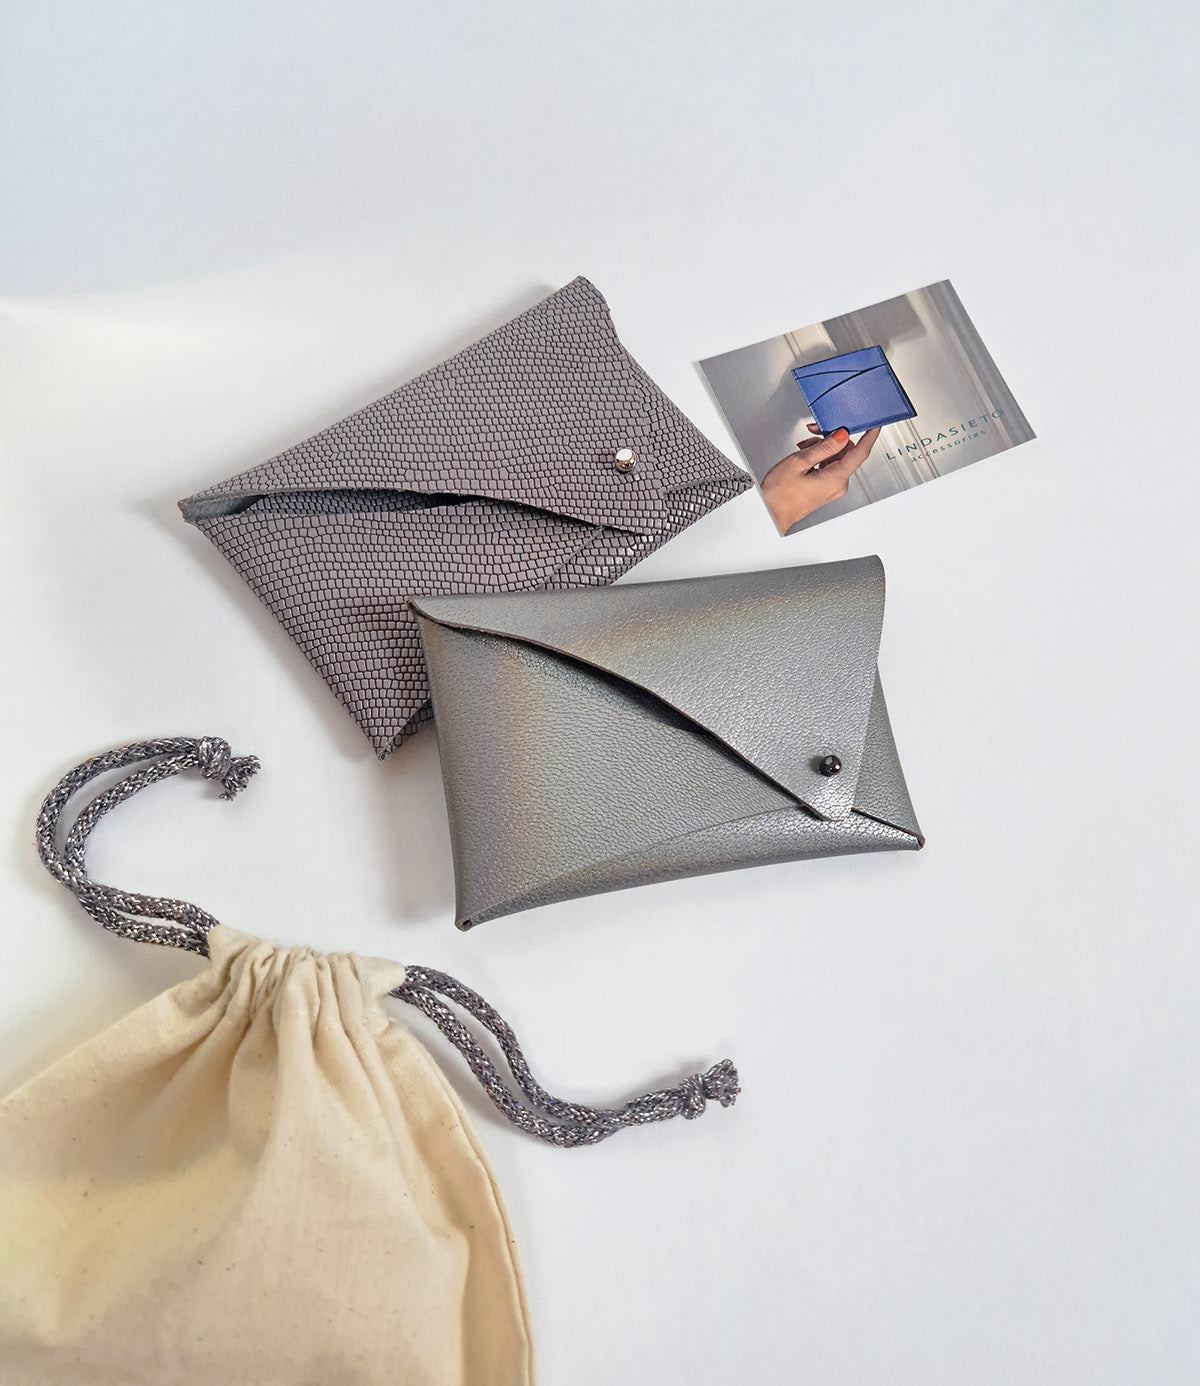 Womens mini leather cardholder wallets, in taupe lilac and grey with iridescent nebula like effect, with cotton dust bag, gift wrap. 